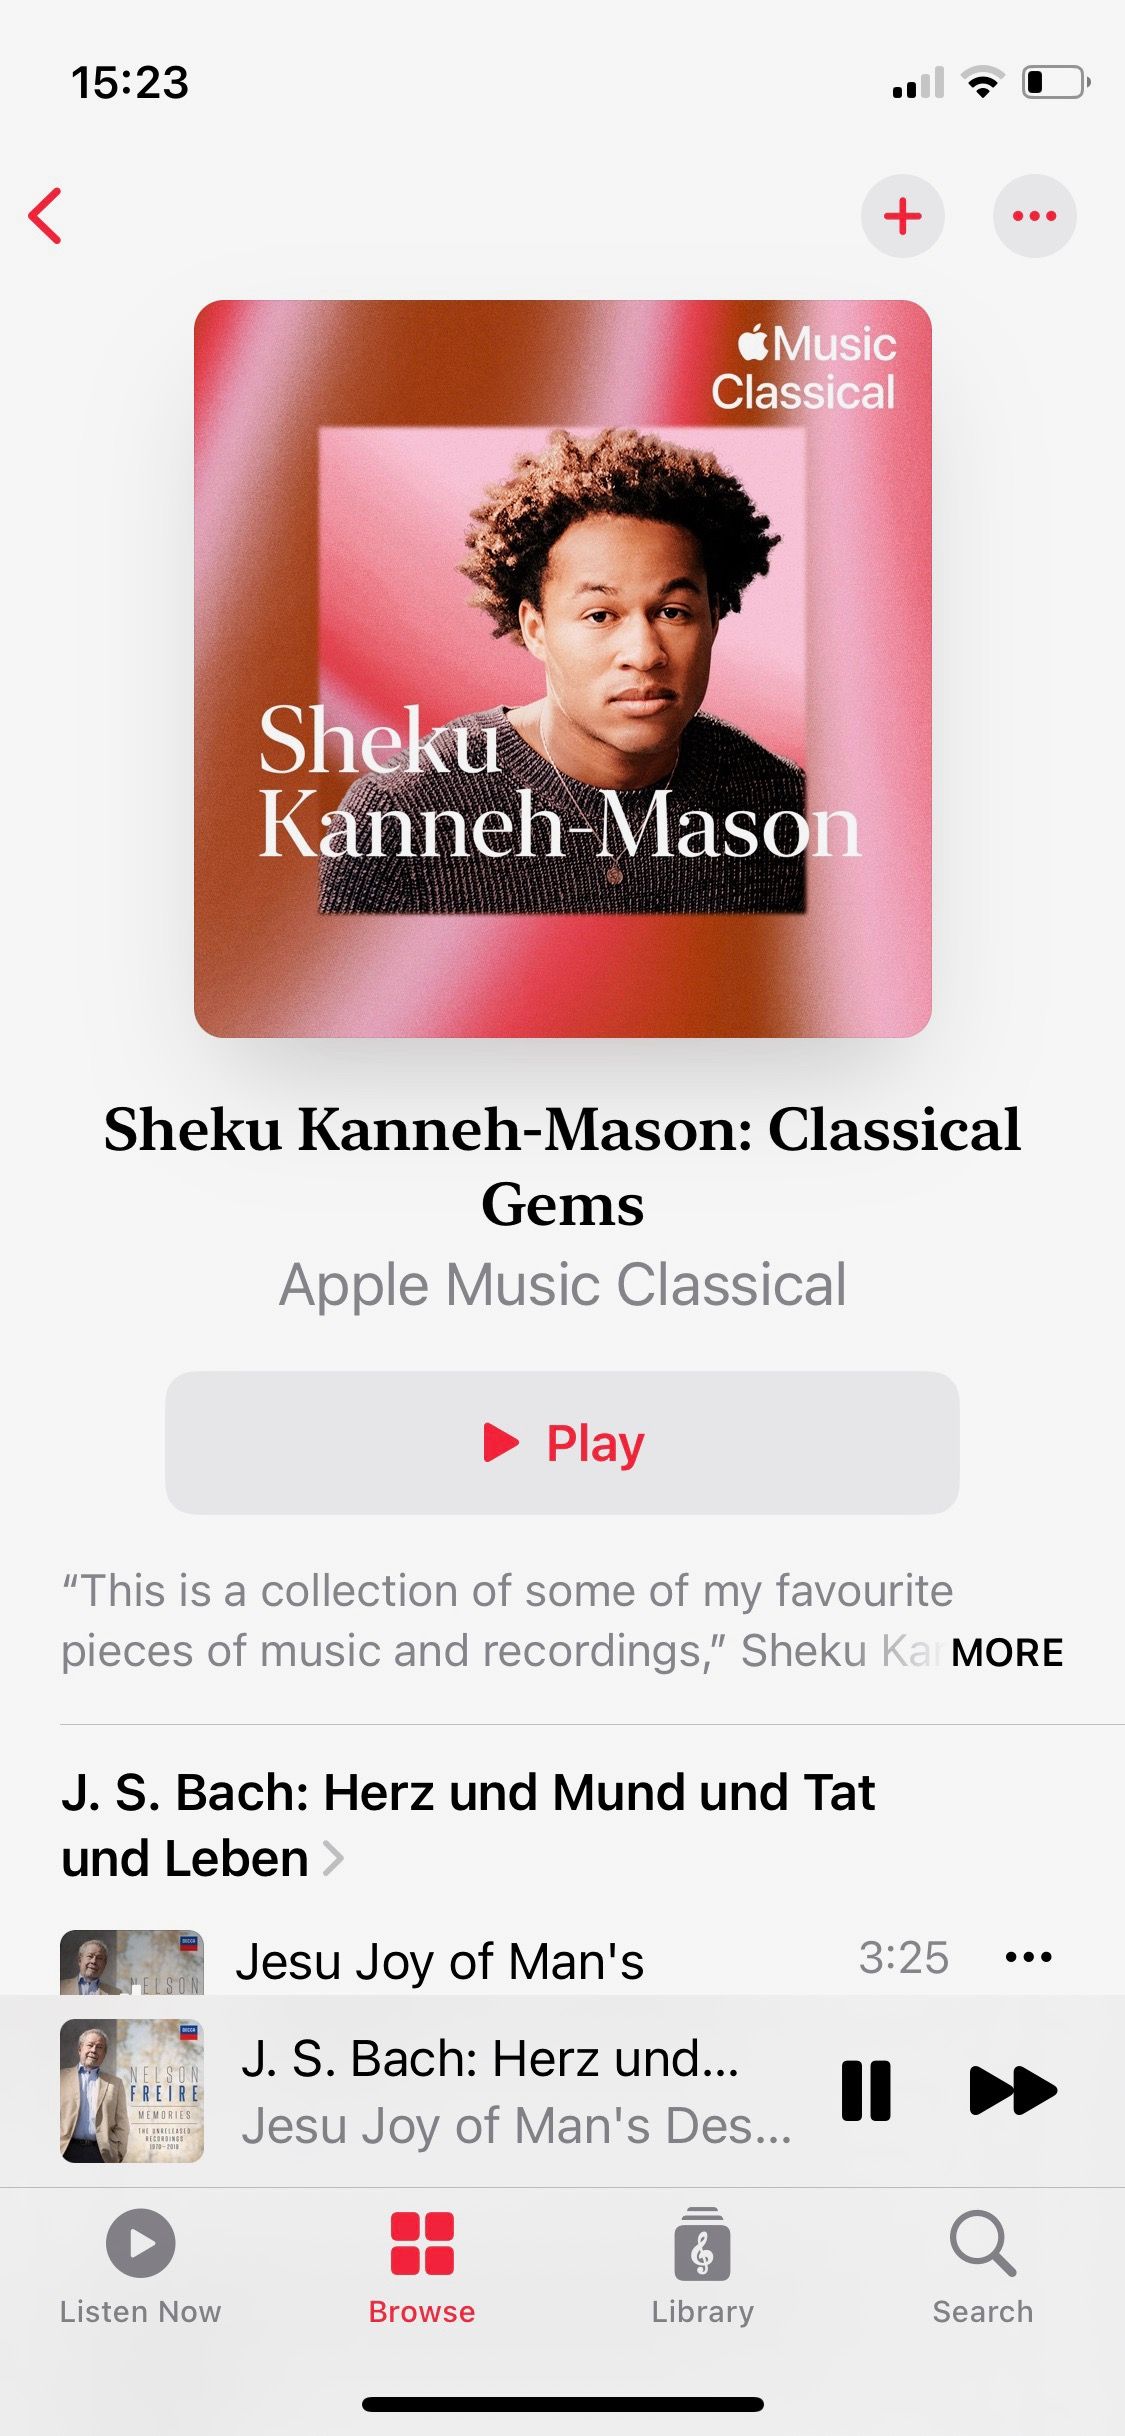 Screenshot of Apple Music Classical Curated collection by Sheku Kanneh-Mason